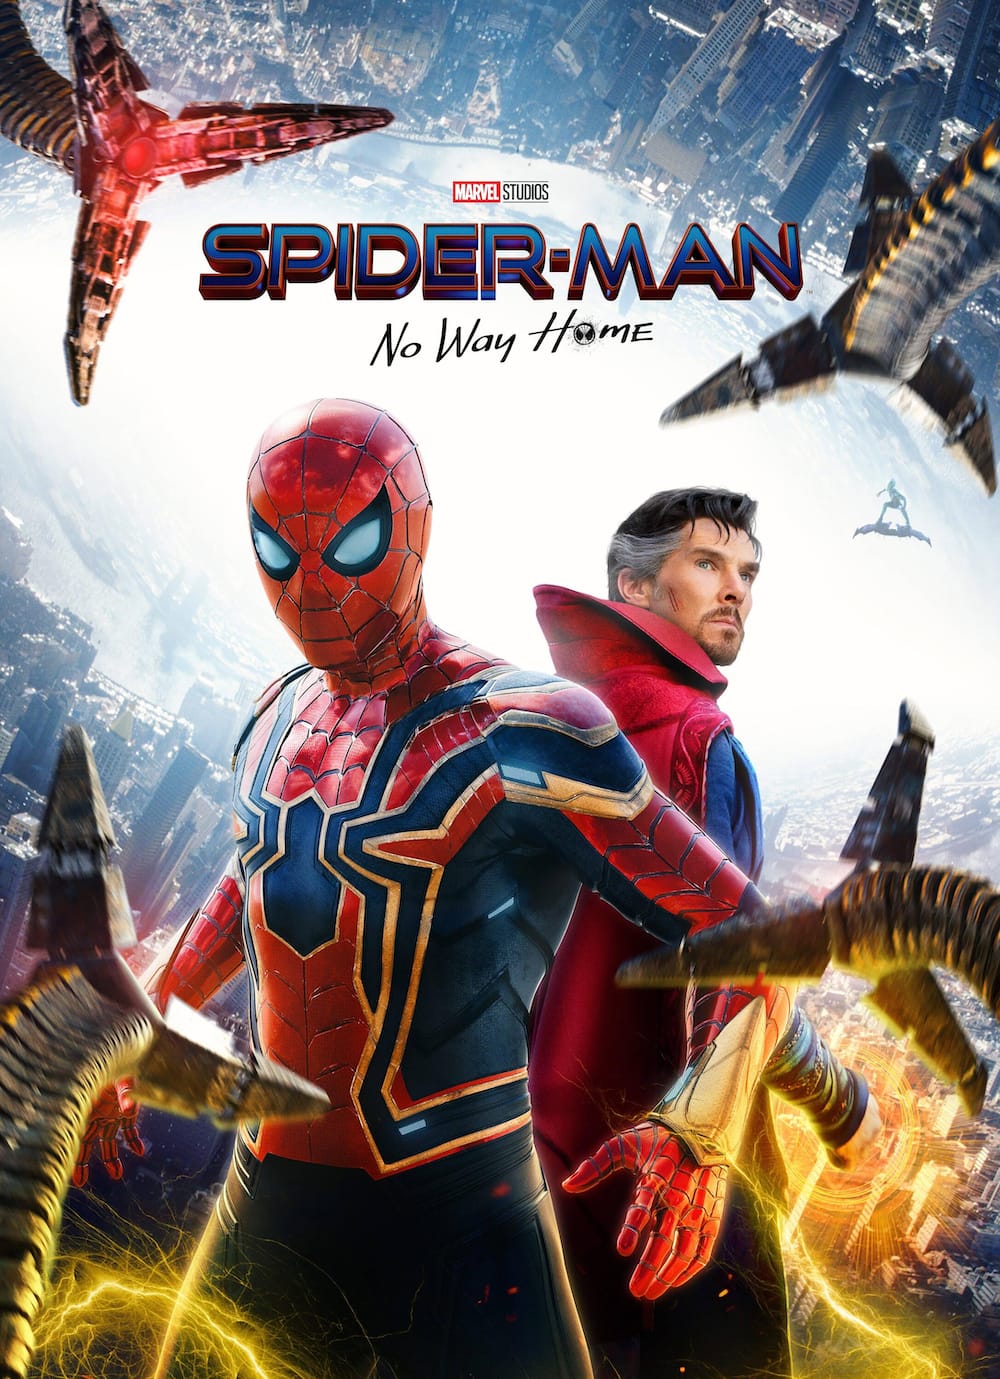 'Spider-Man: No Way Home' Extended Cut to Hit the Theatres on September 2, 2022